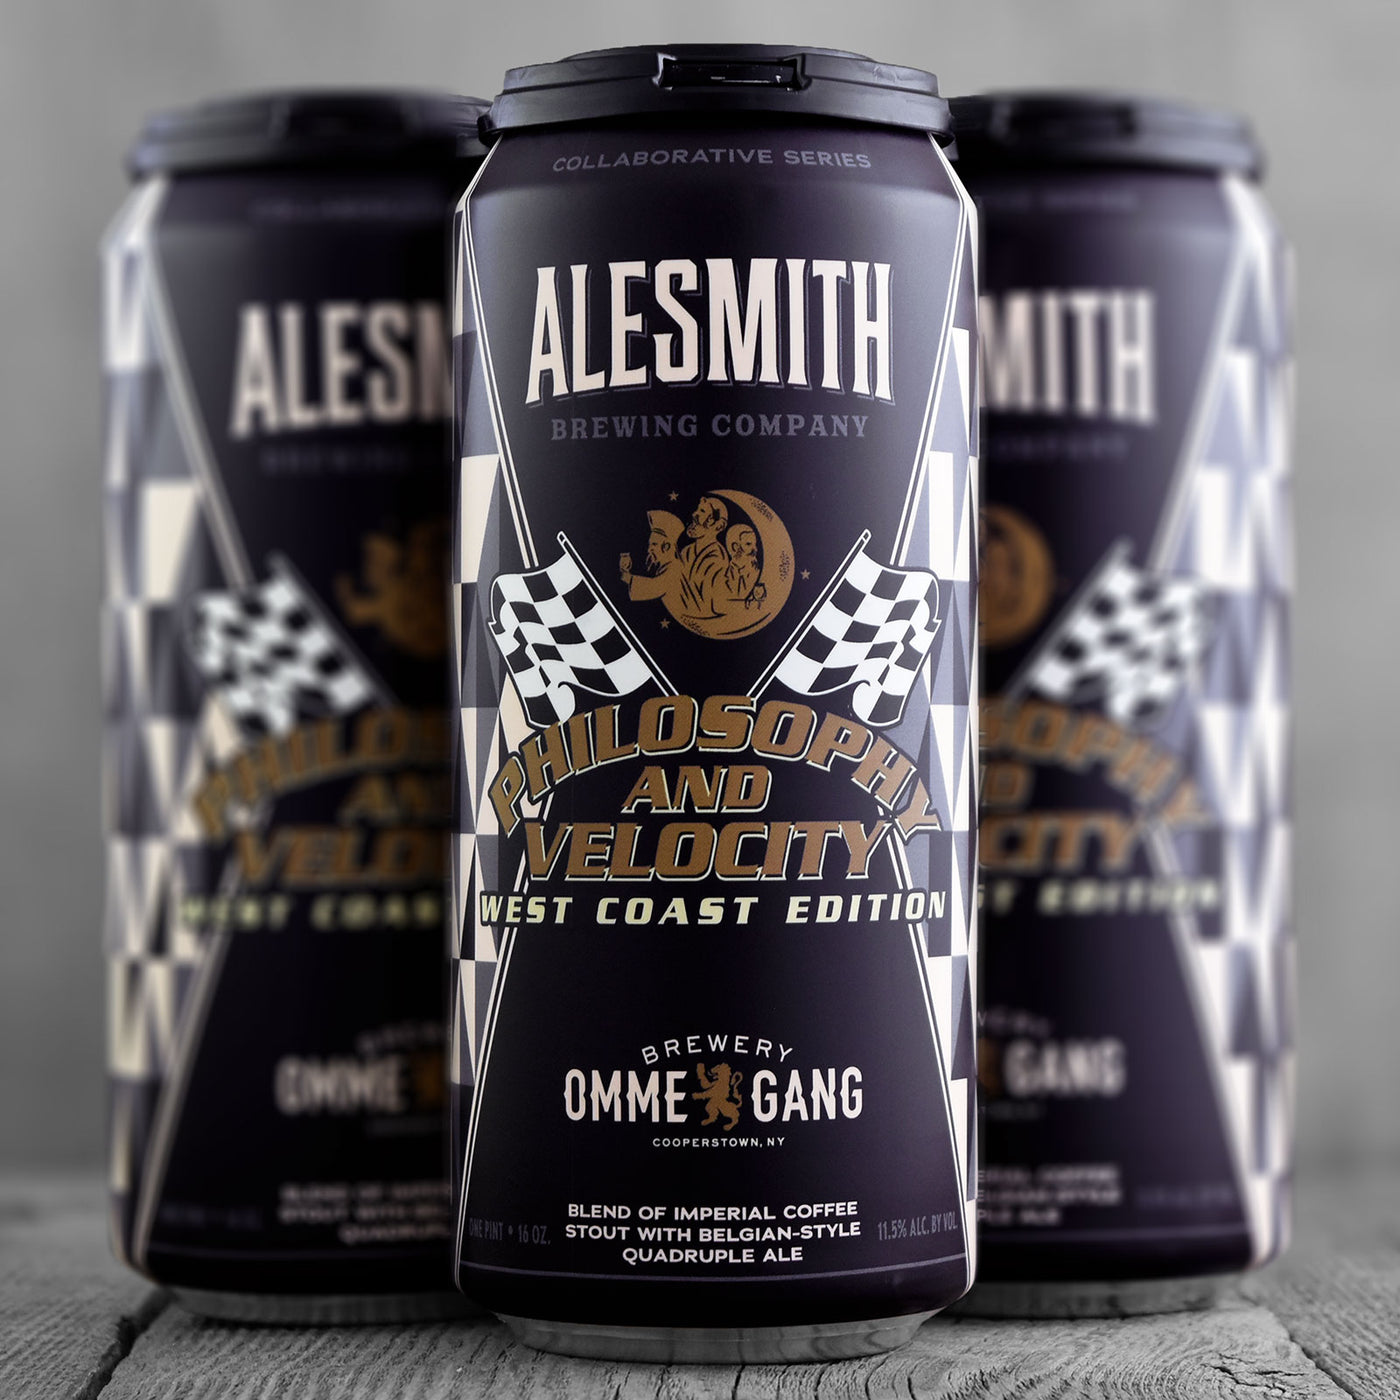 AleSmith / Ommegang - Philosophy And Velocity (West Coast Edition)